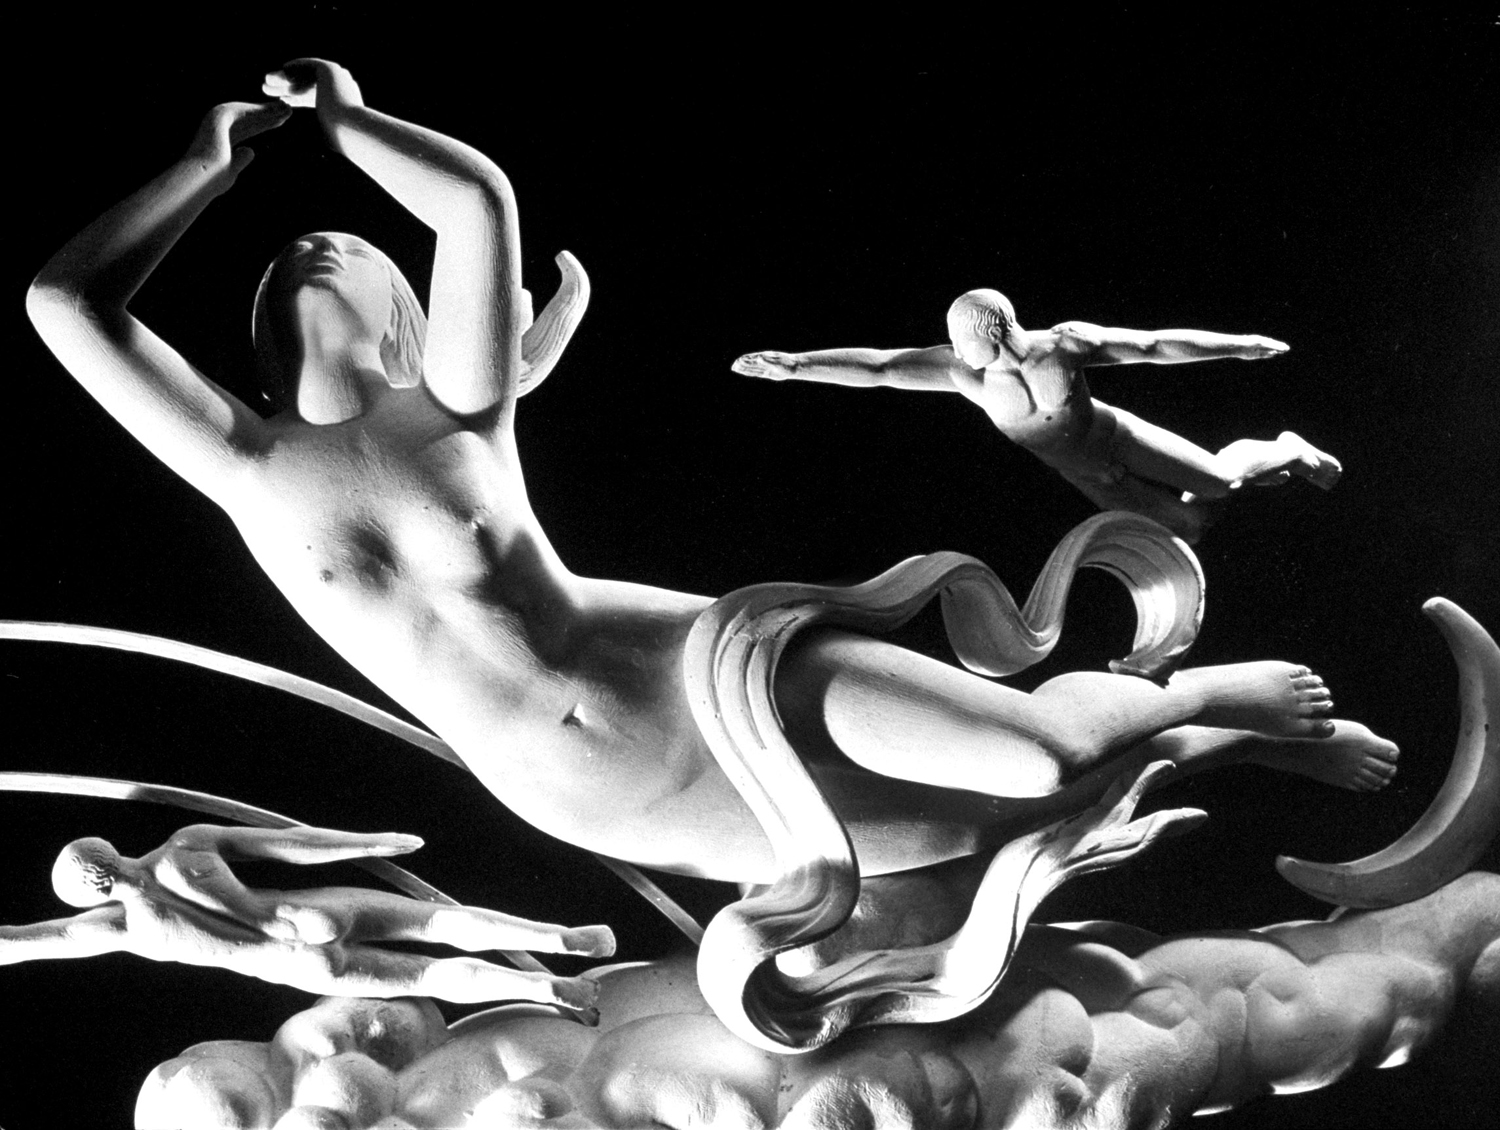 Models of the sculpture 'Night' by artist Paul Manship, created for the 1939-1940 World's Fair.